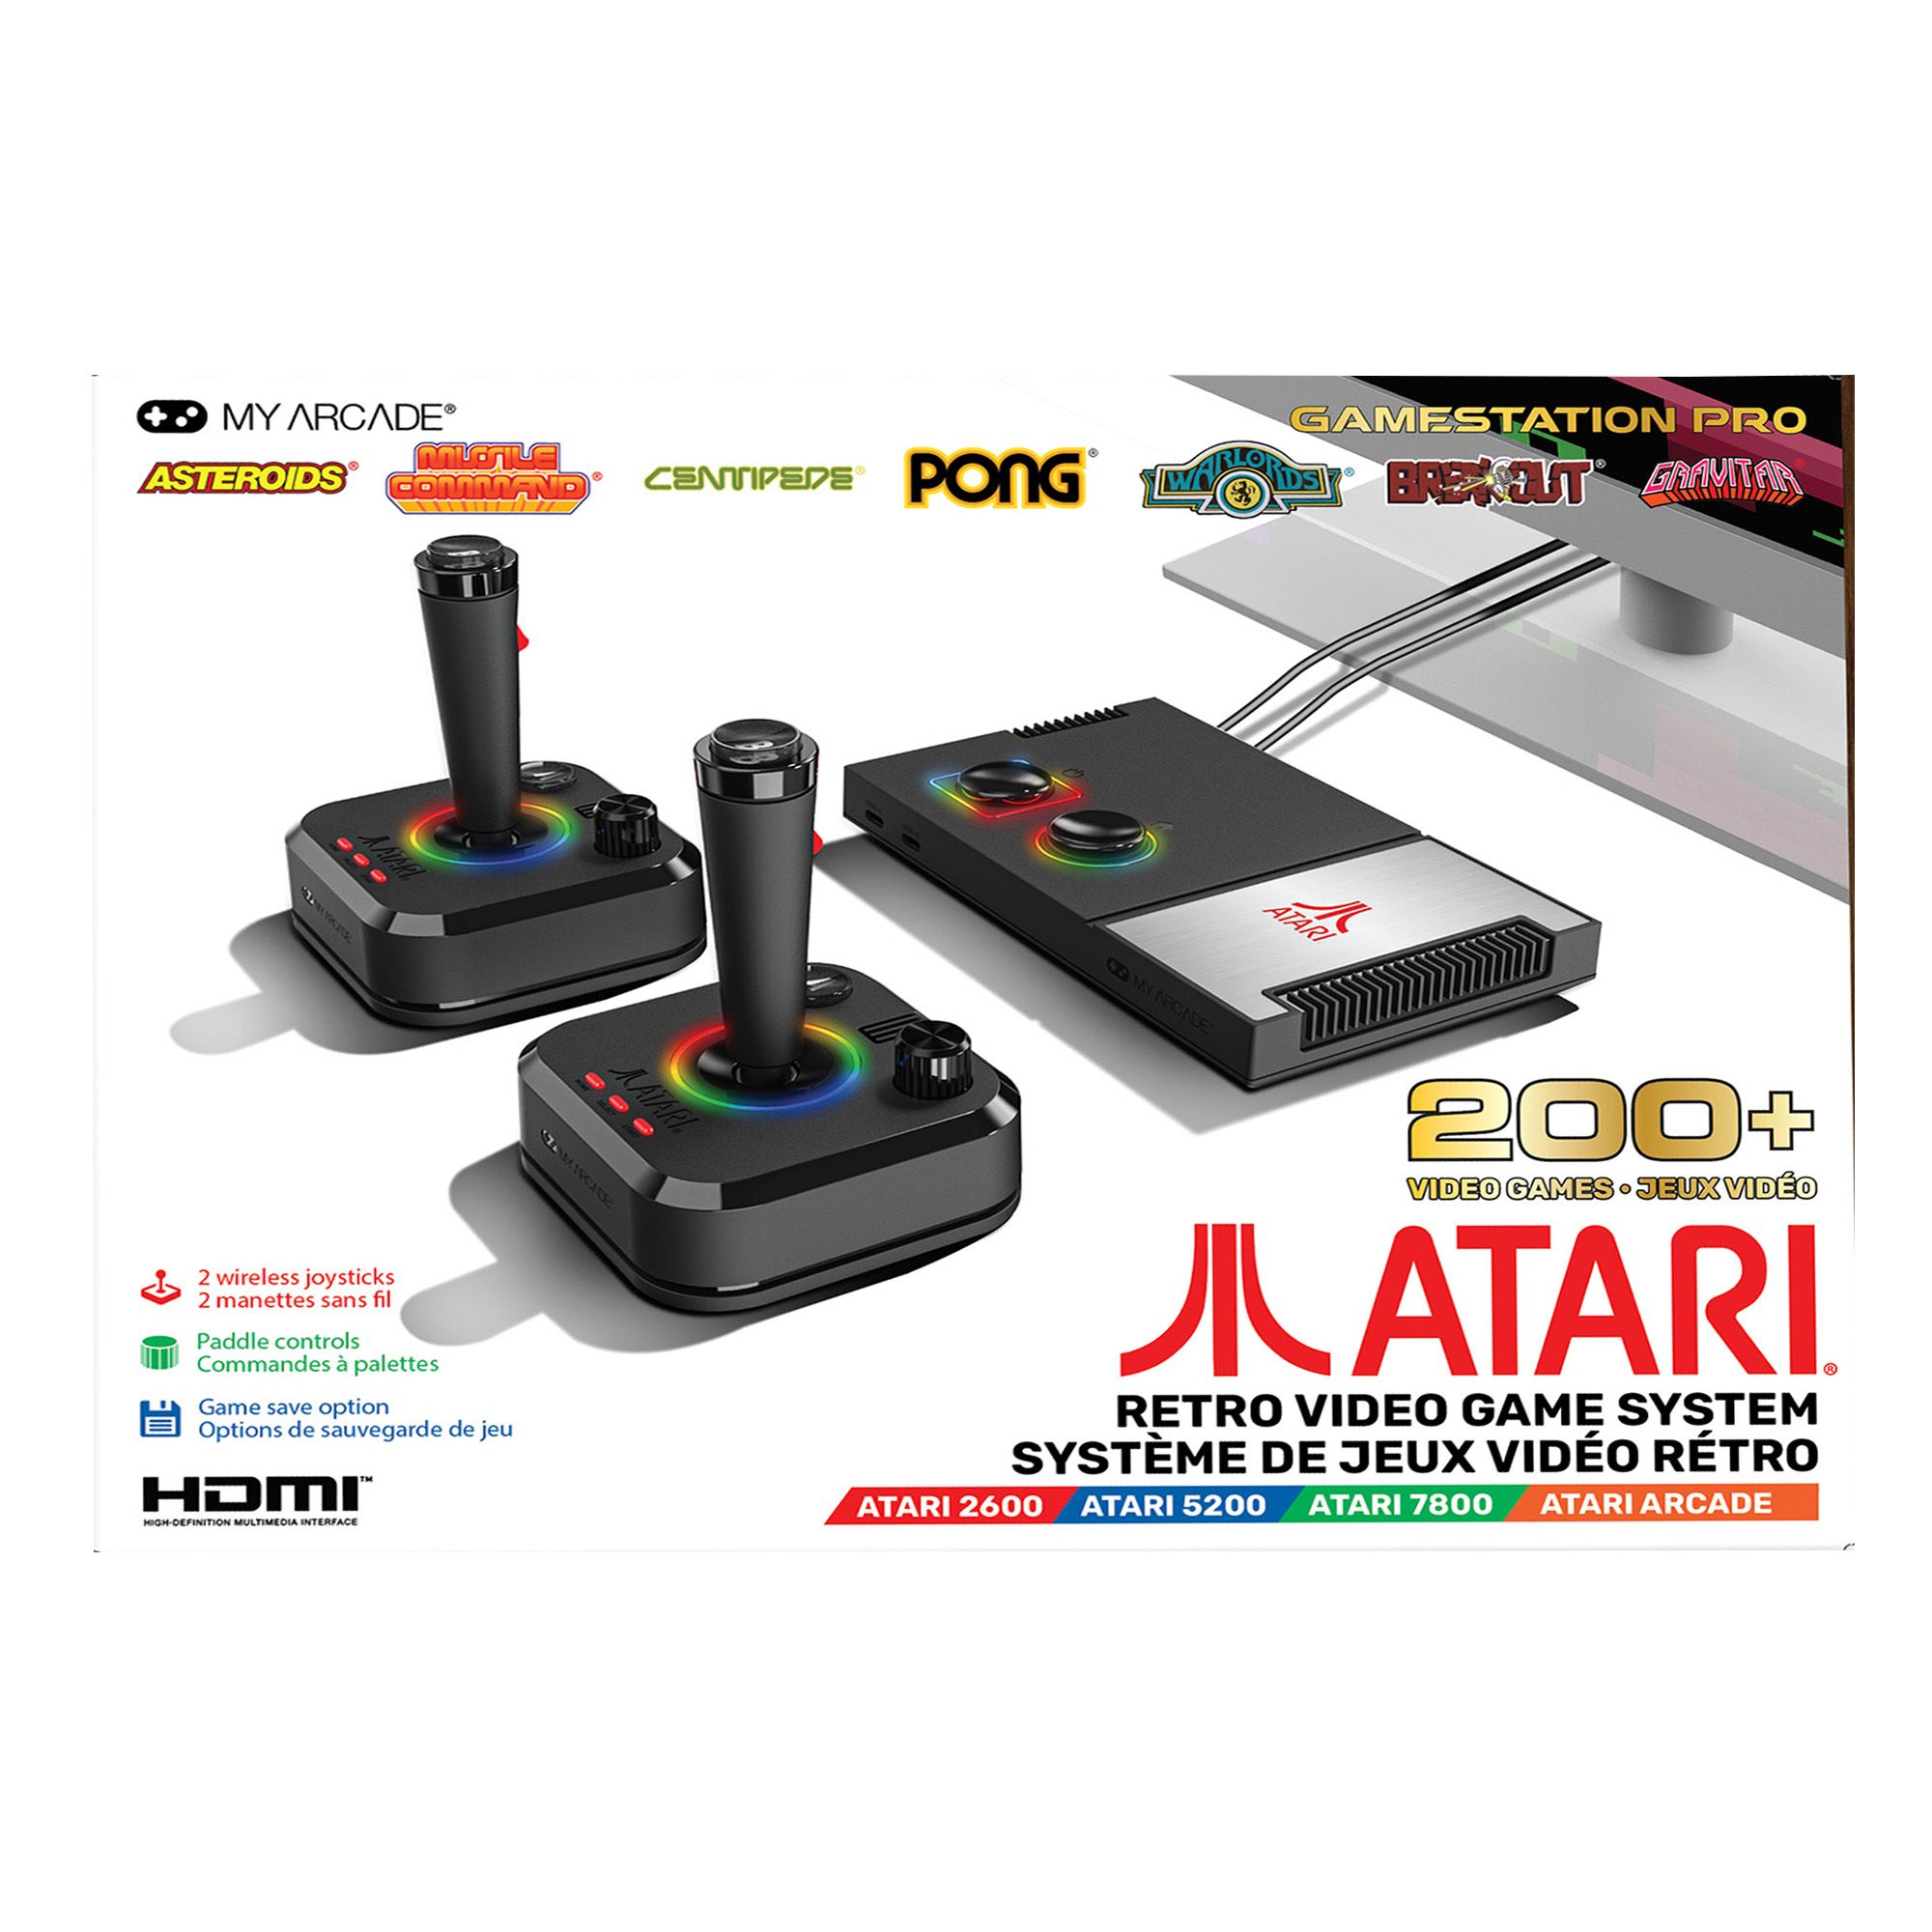 My Arcade® Releases The Atari® Gamestation Pro With 200